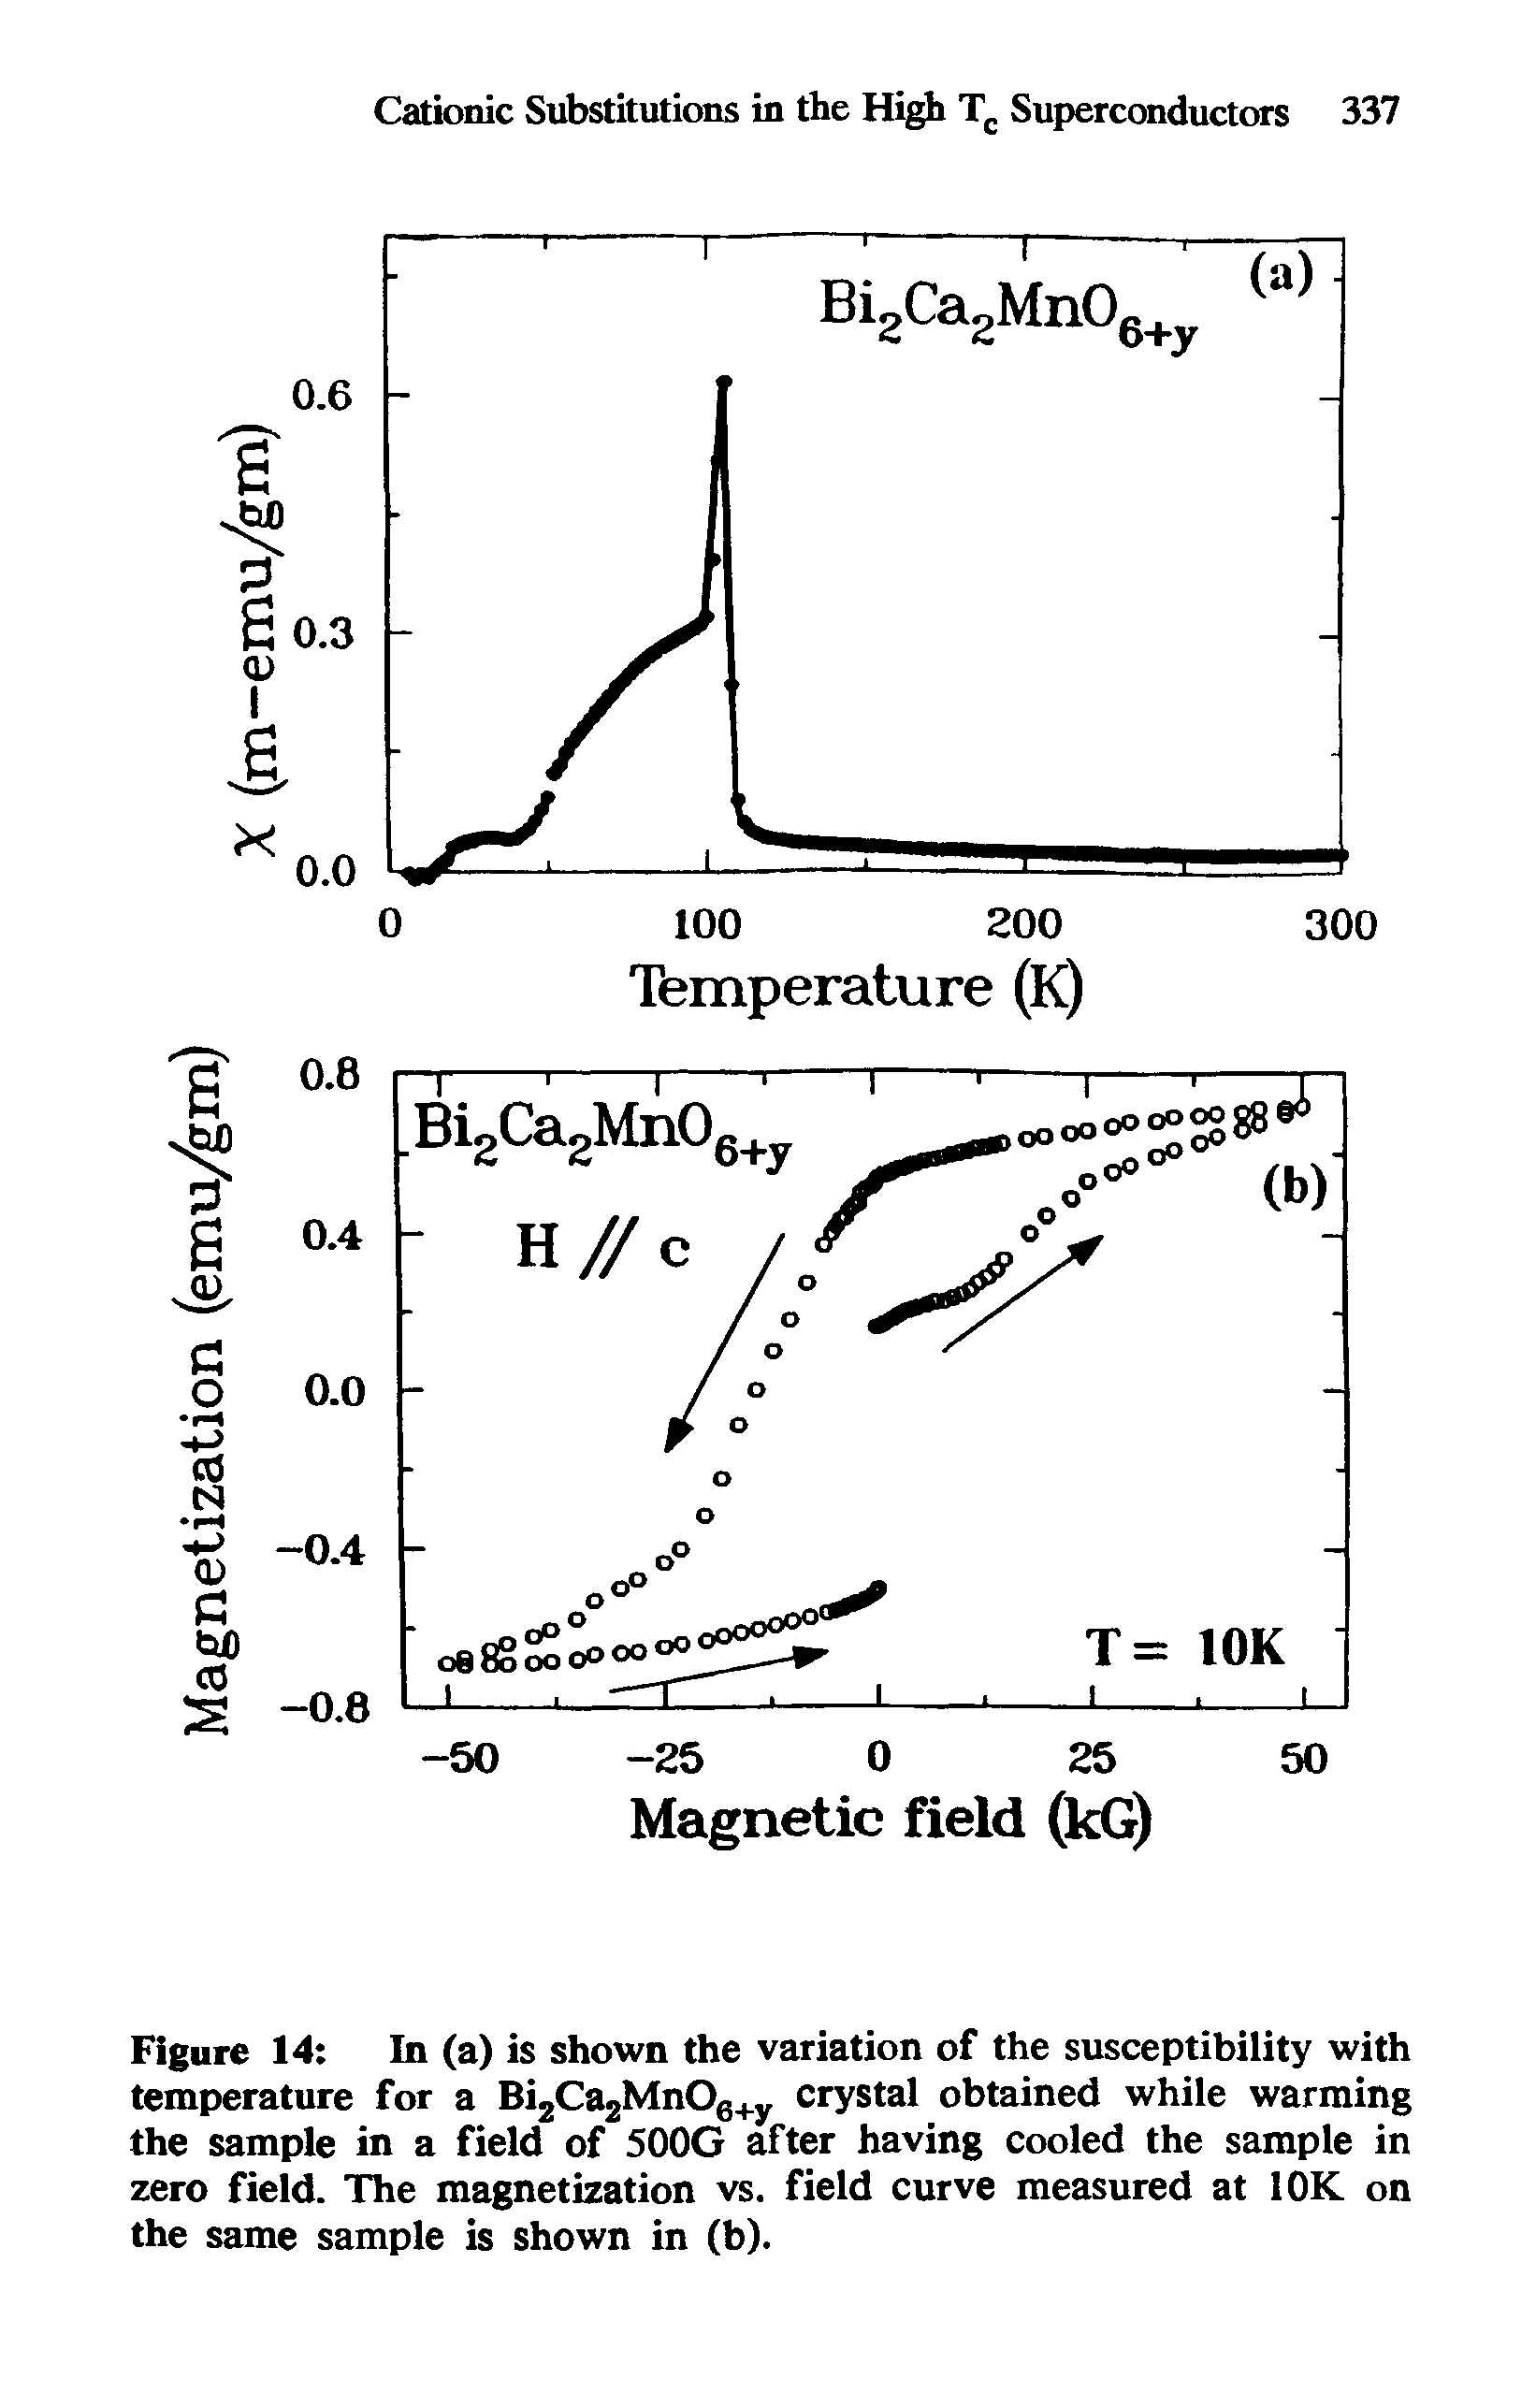 Figure 14 In (a) is shown the variation of the susceptibility with temperature for a Bi2Ca2Mn06+y crystal obtained while warming the sample in a field of 500G after having cooled the sample in zero field. The magnetization vs. field curve measured at 10K on the same sample is shown in (b).